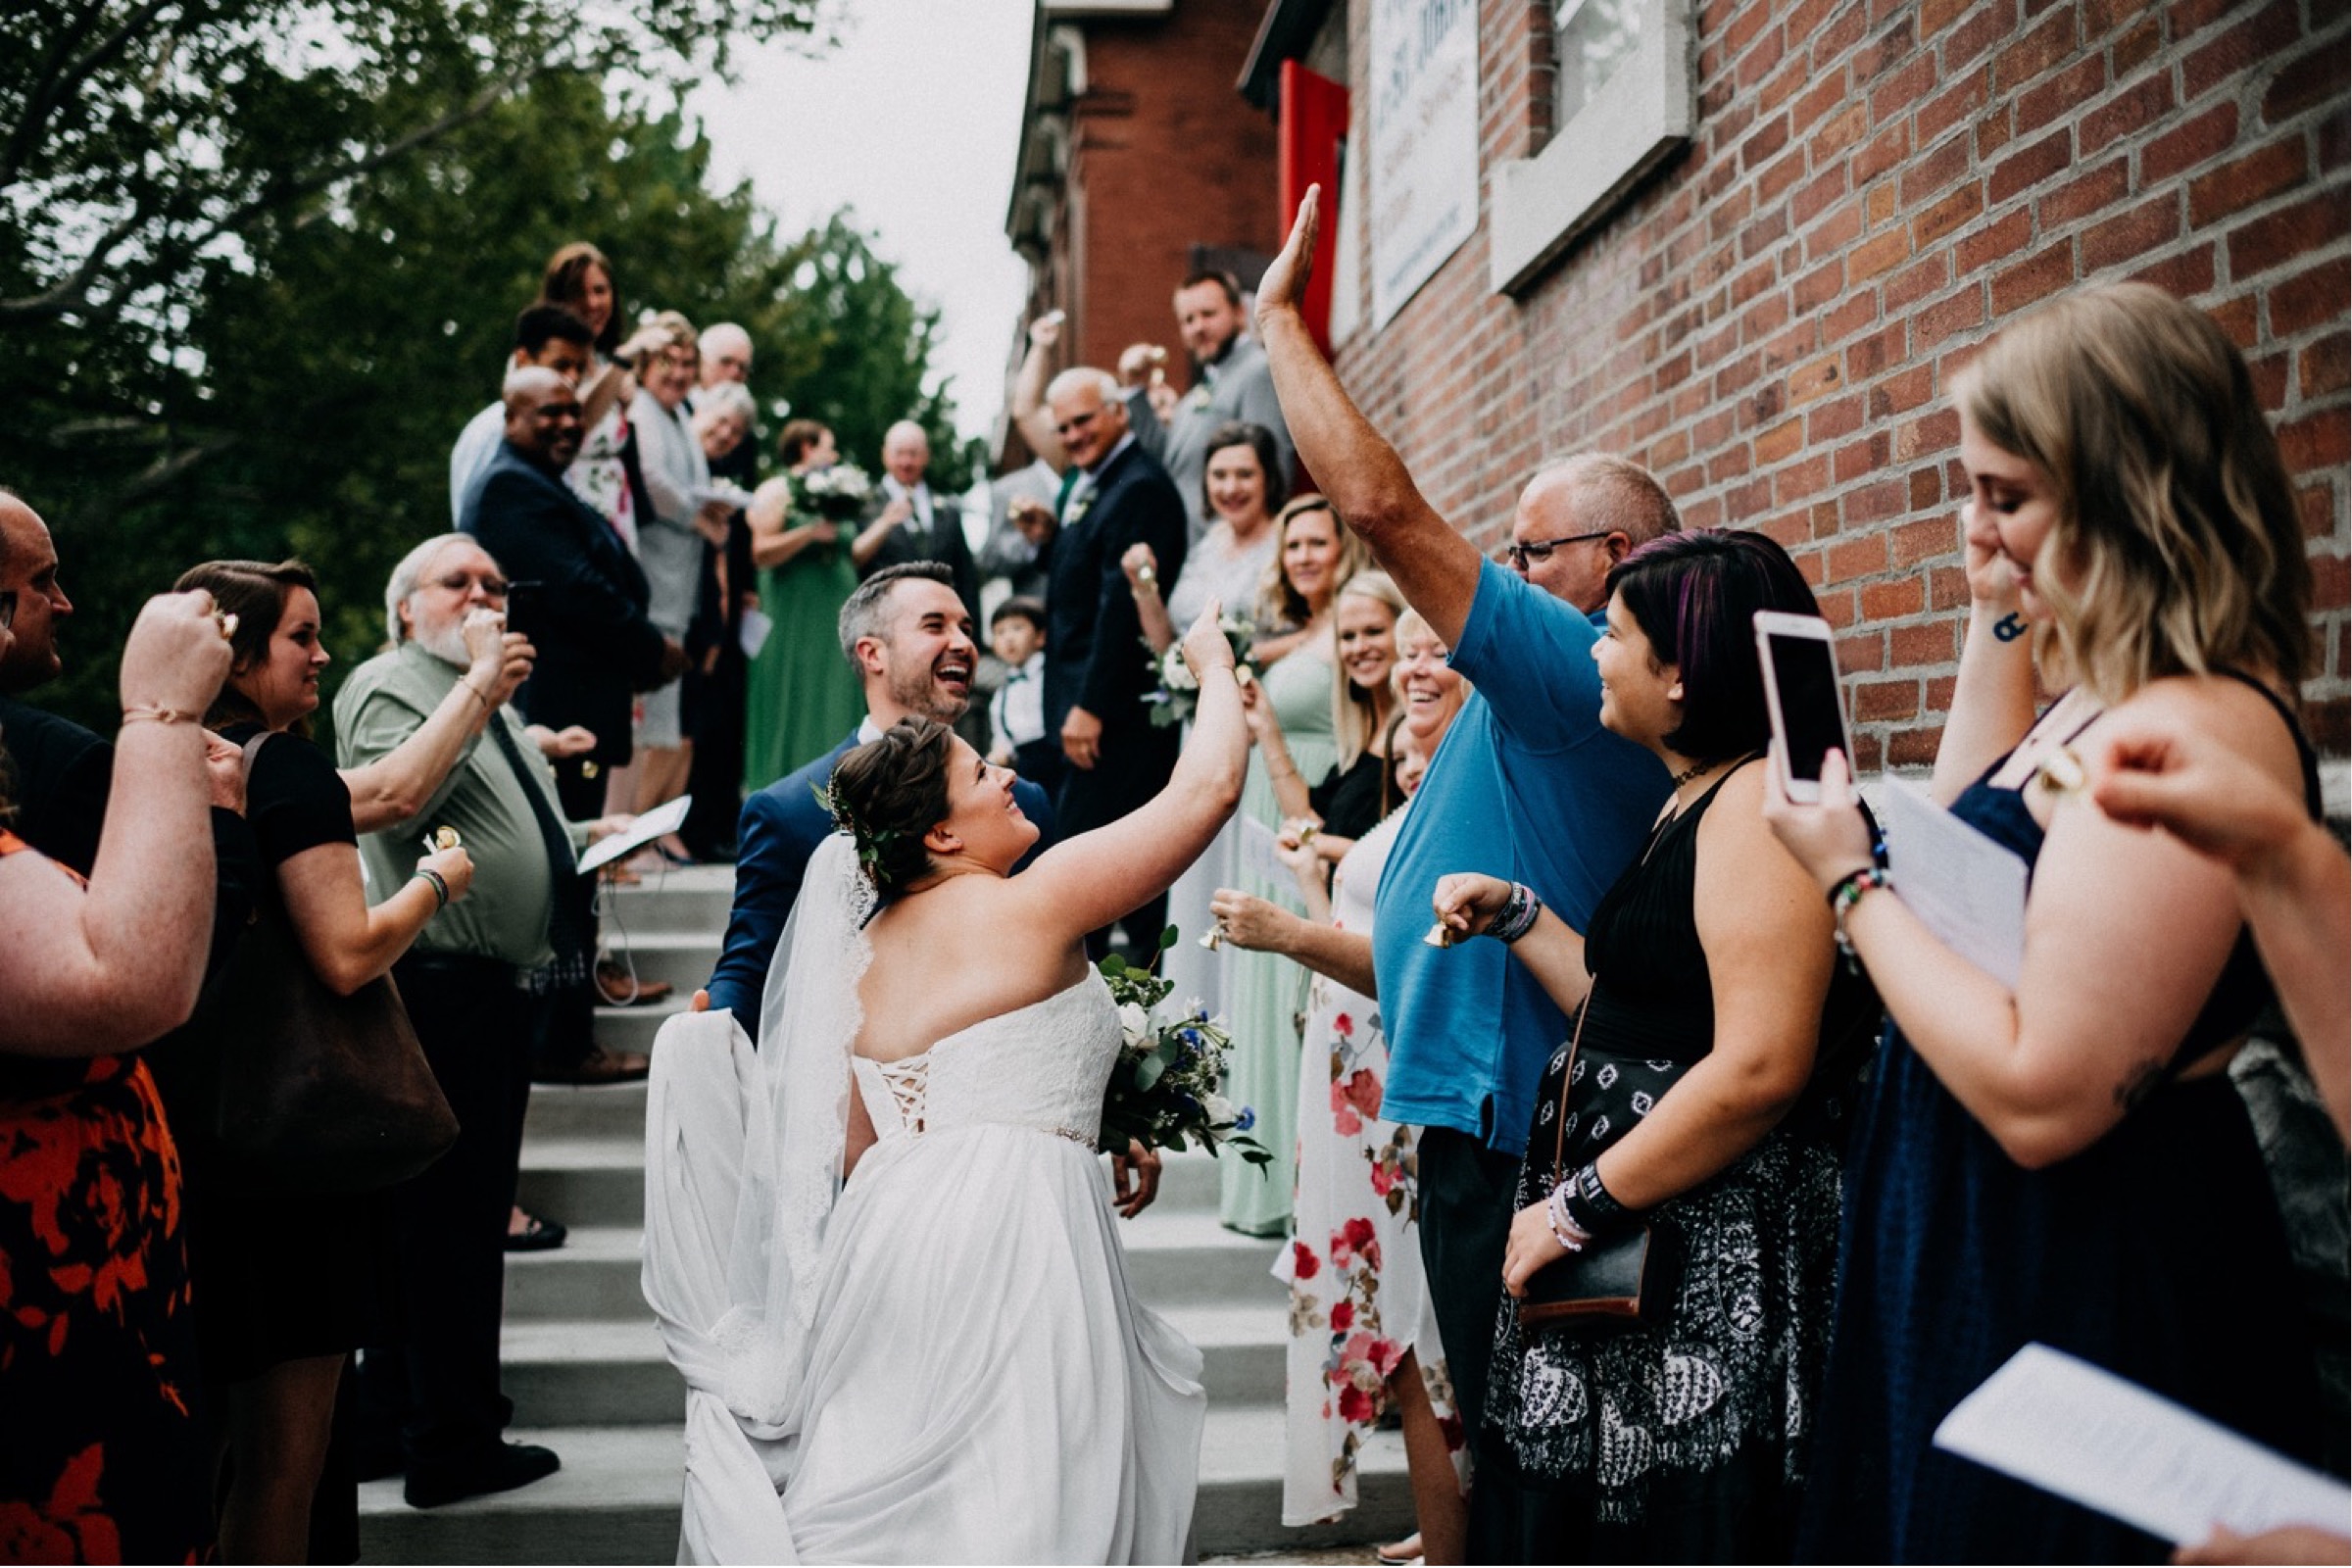 A bride high fives her guests during a receiving line portion of her wedding day timeline.